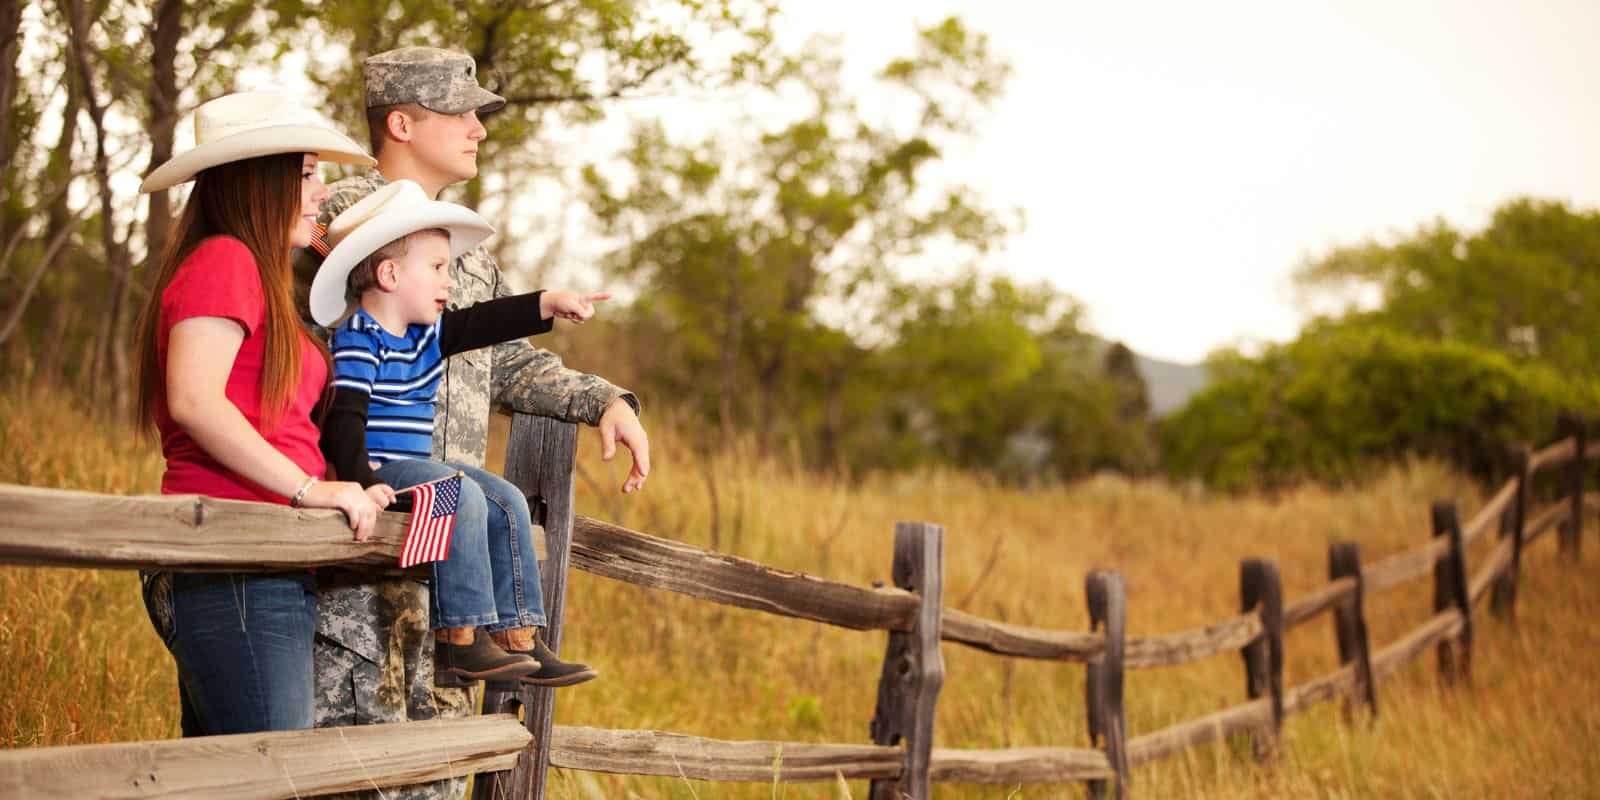 How to Deal With Homesickness When You’re in the Military